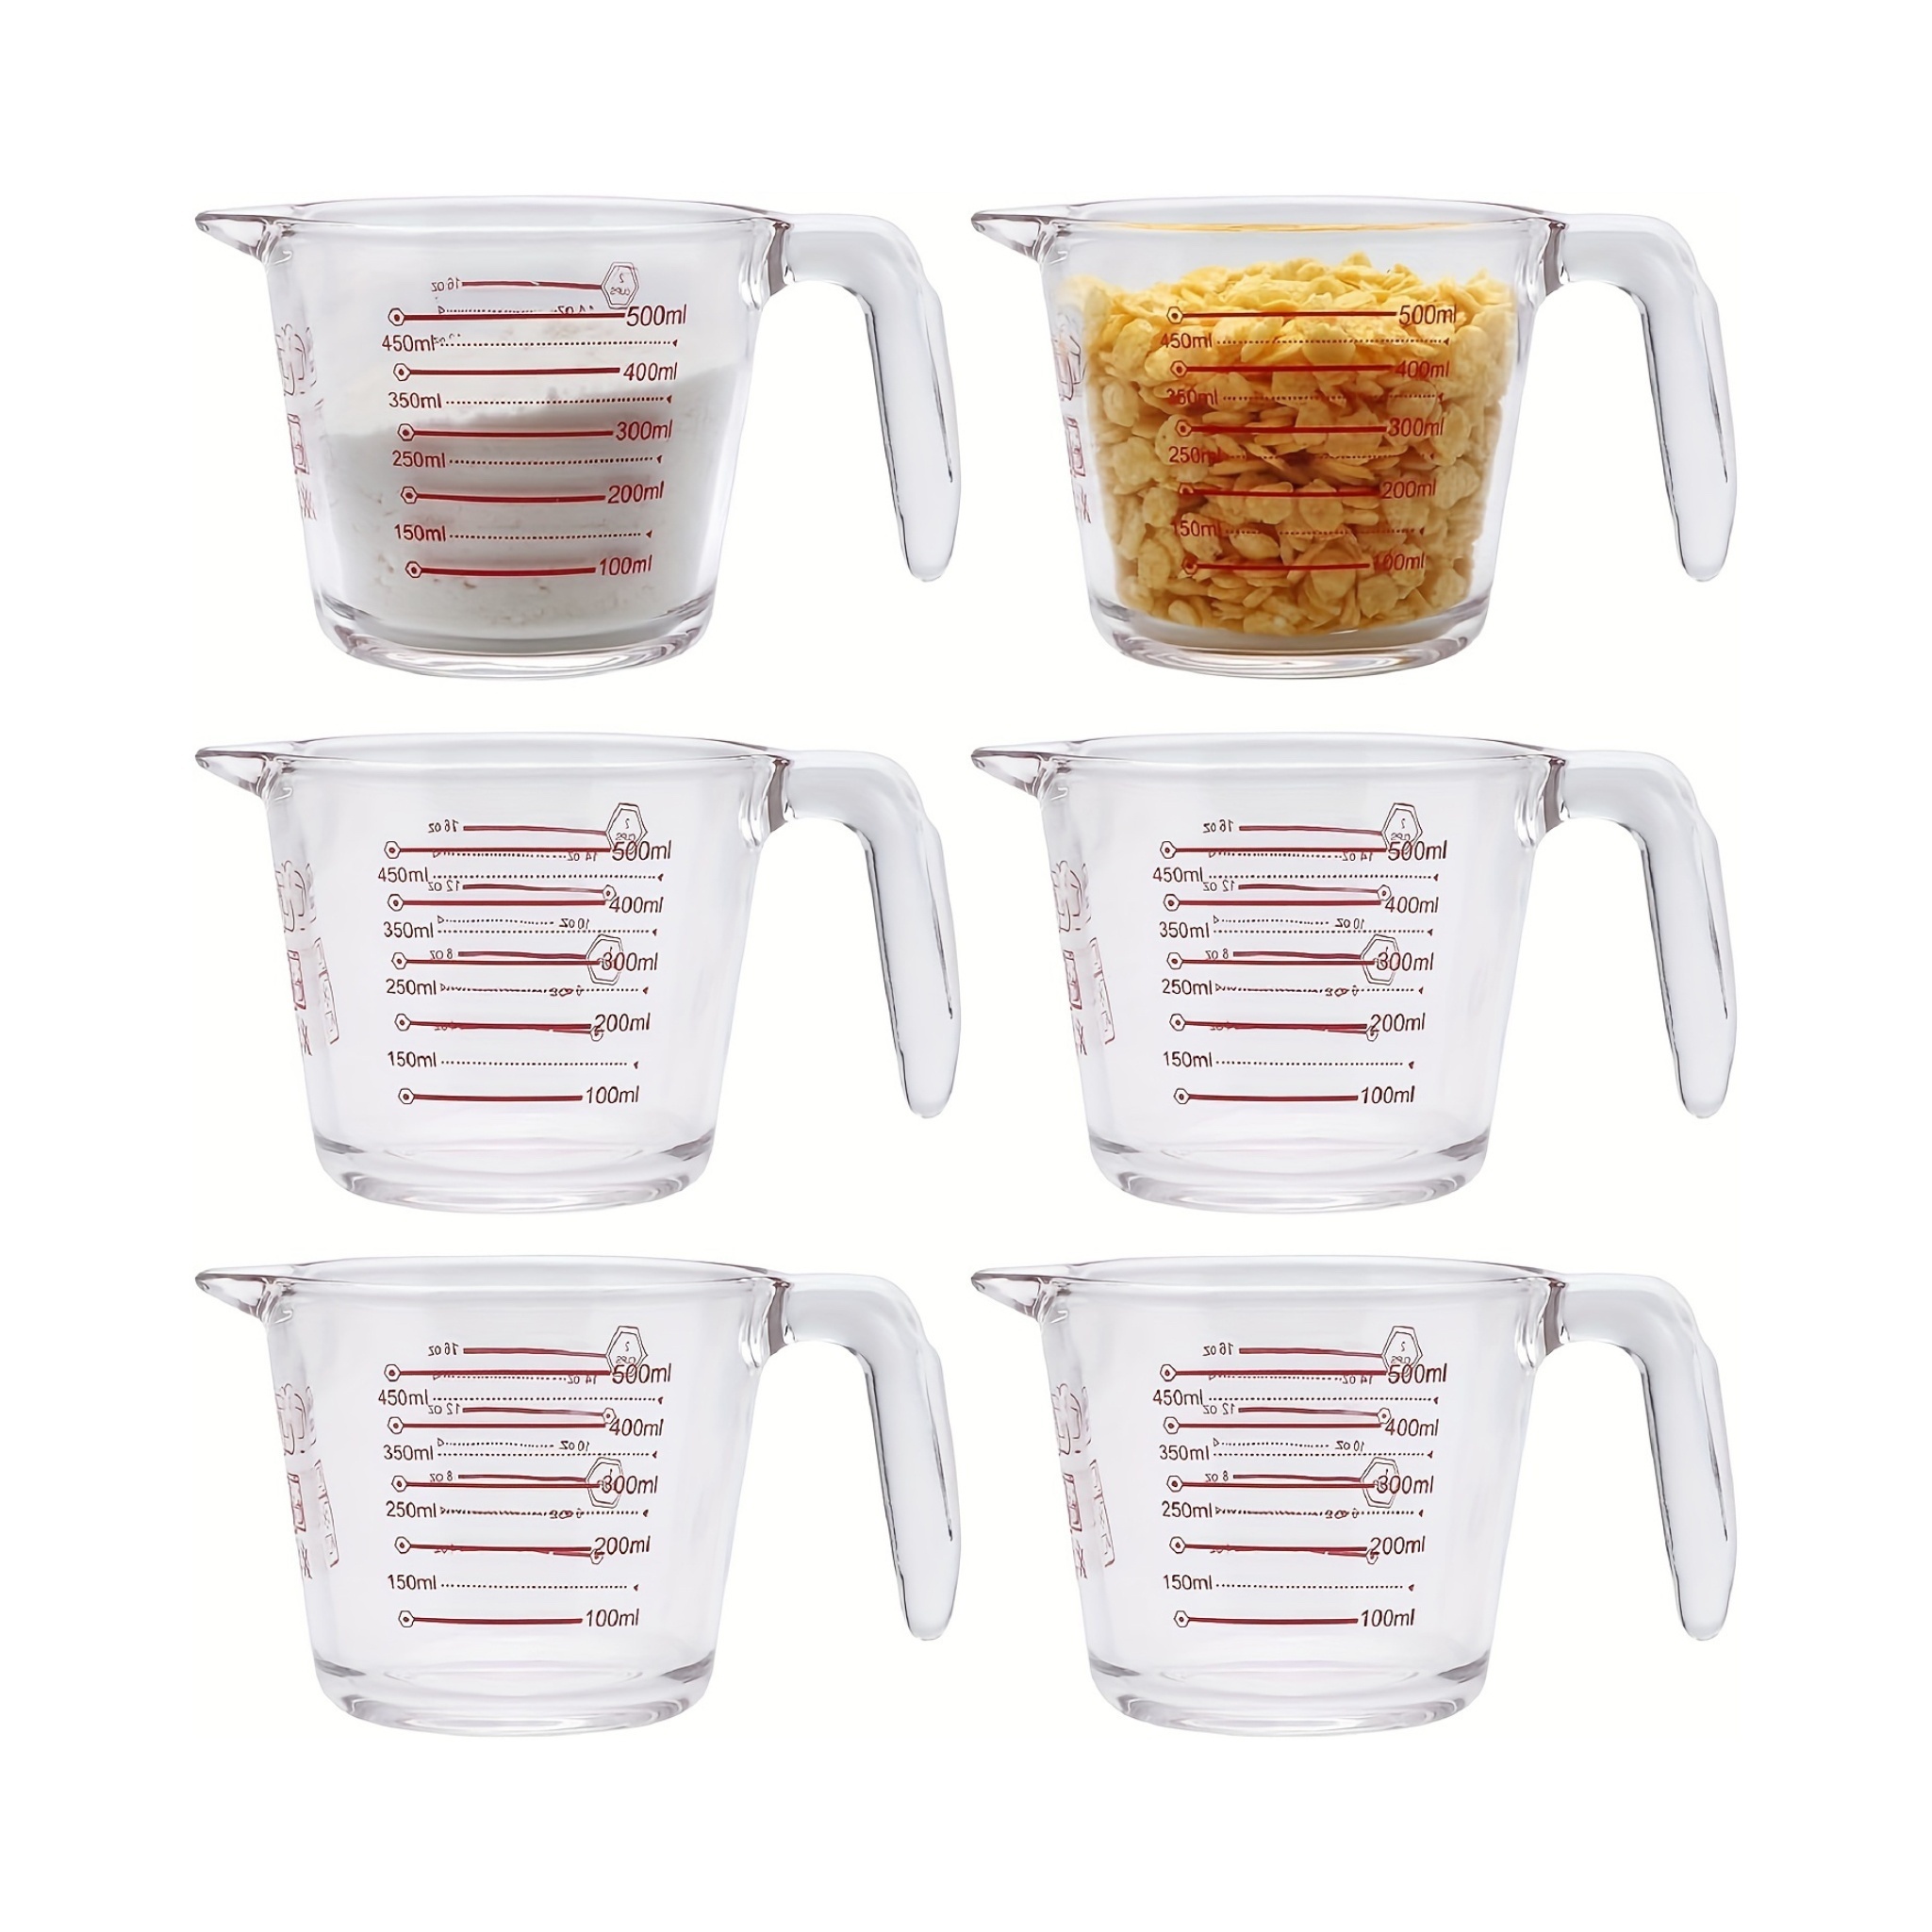 FANCY Tempered Glass Measuring Cup With Handle Grip For Liquid Ml